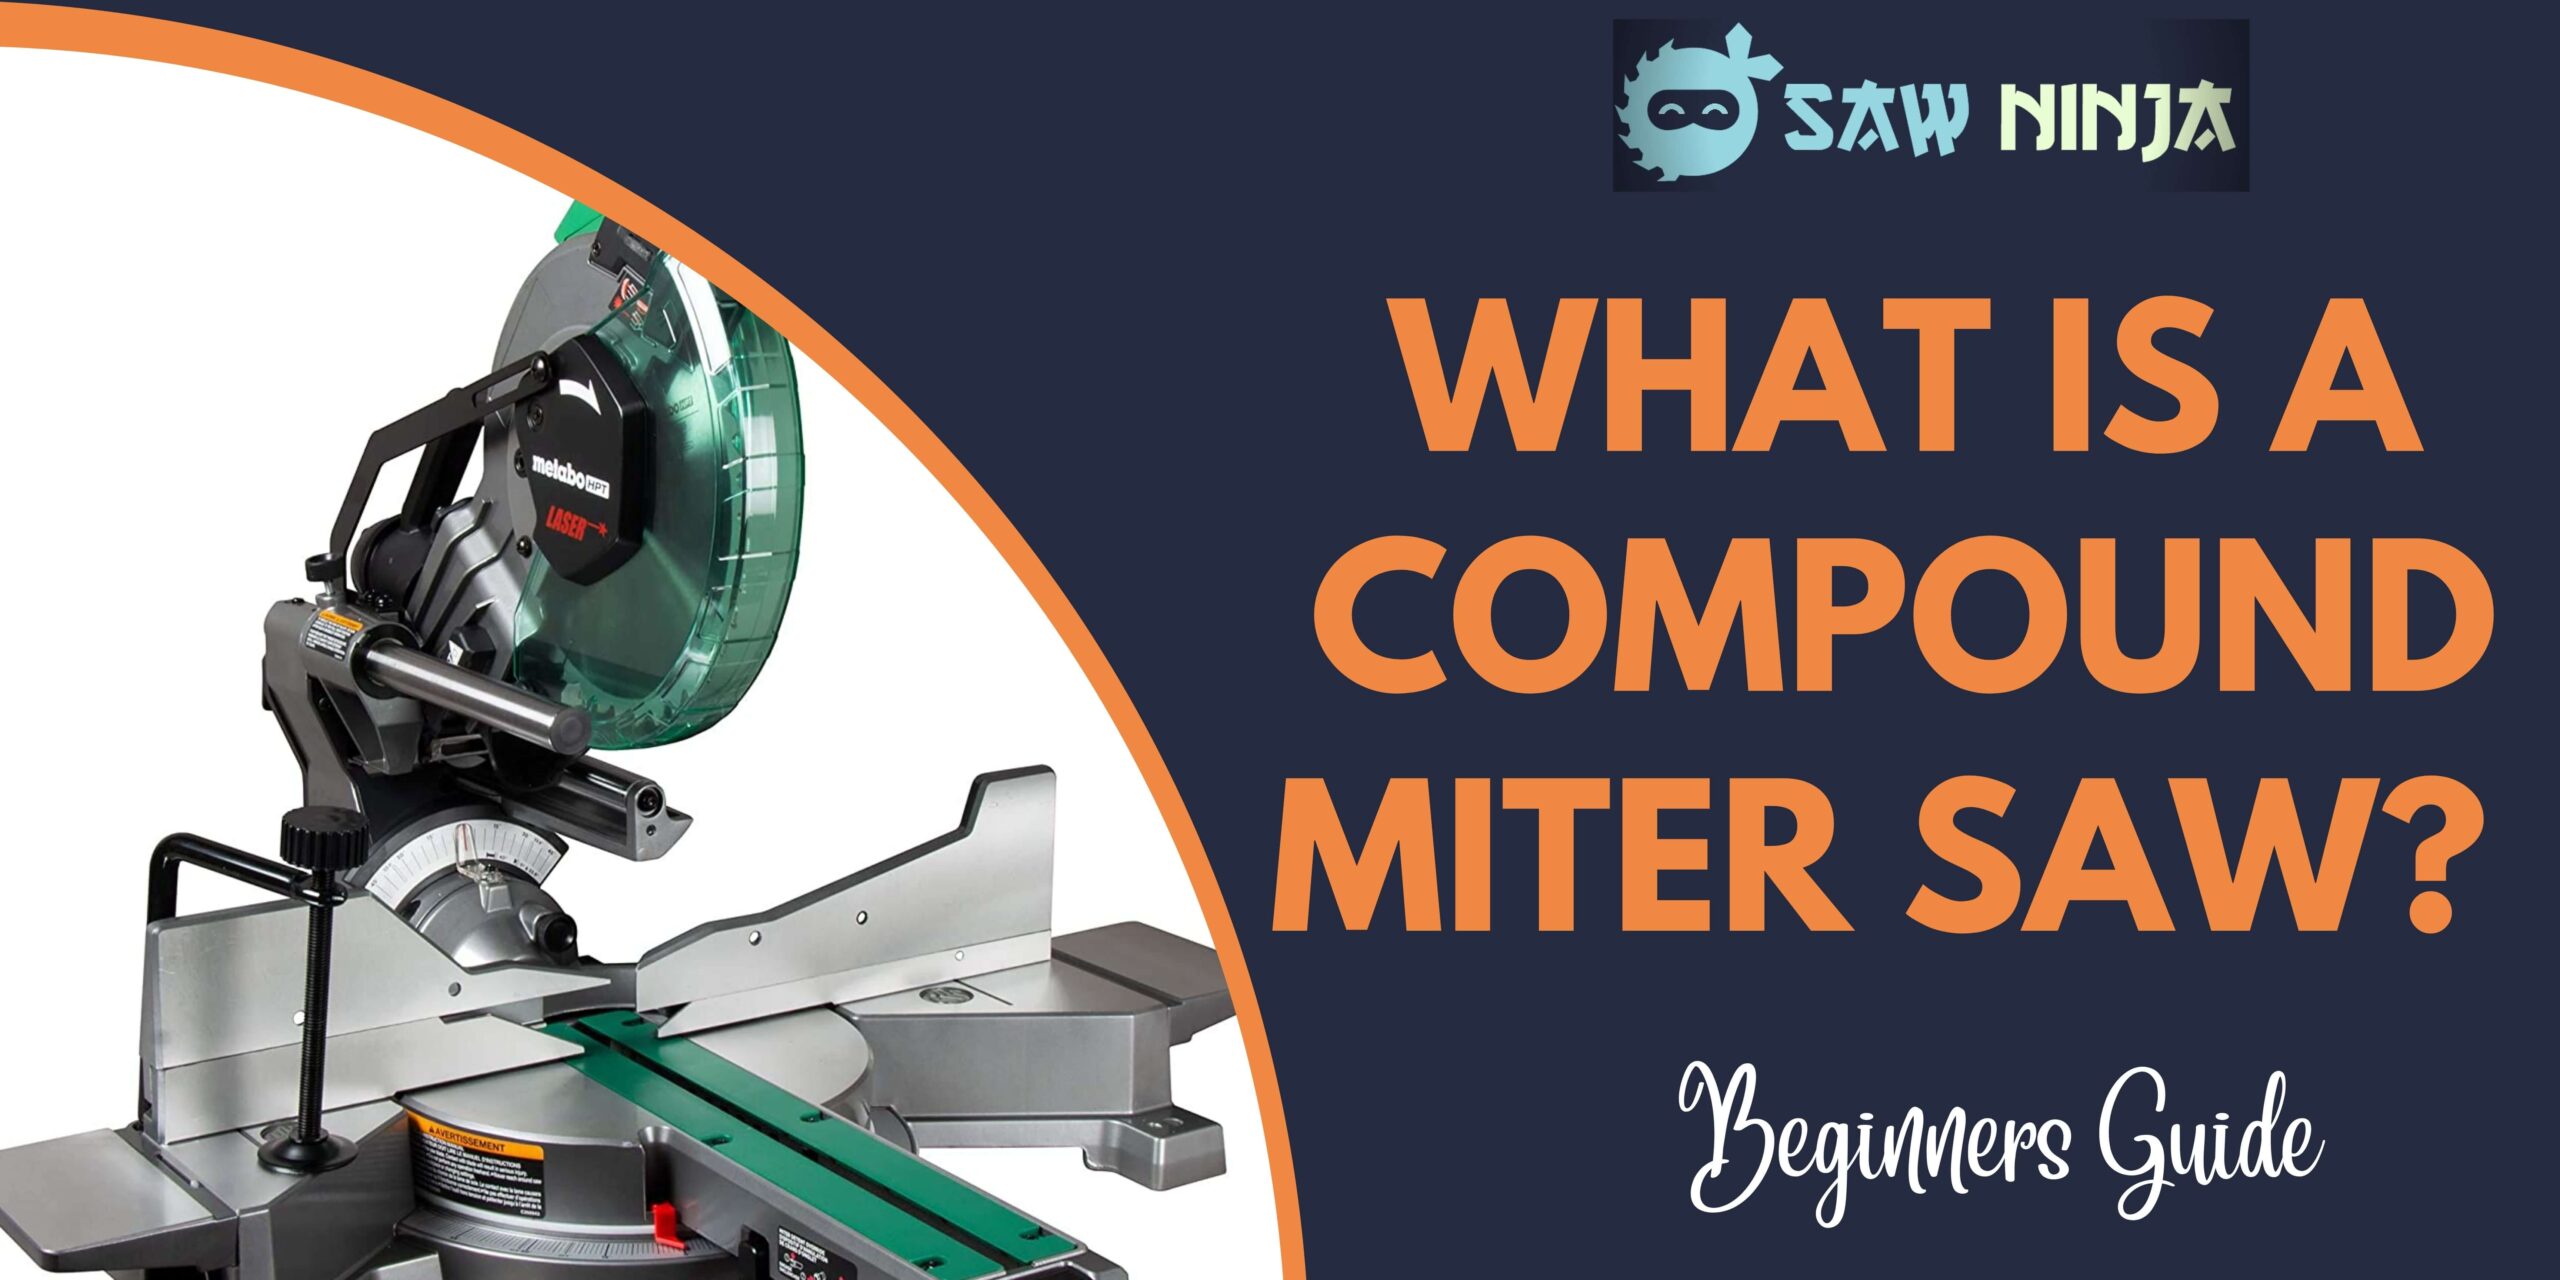 What is a Compound Miter Saw?